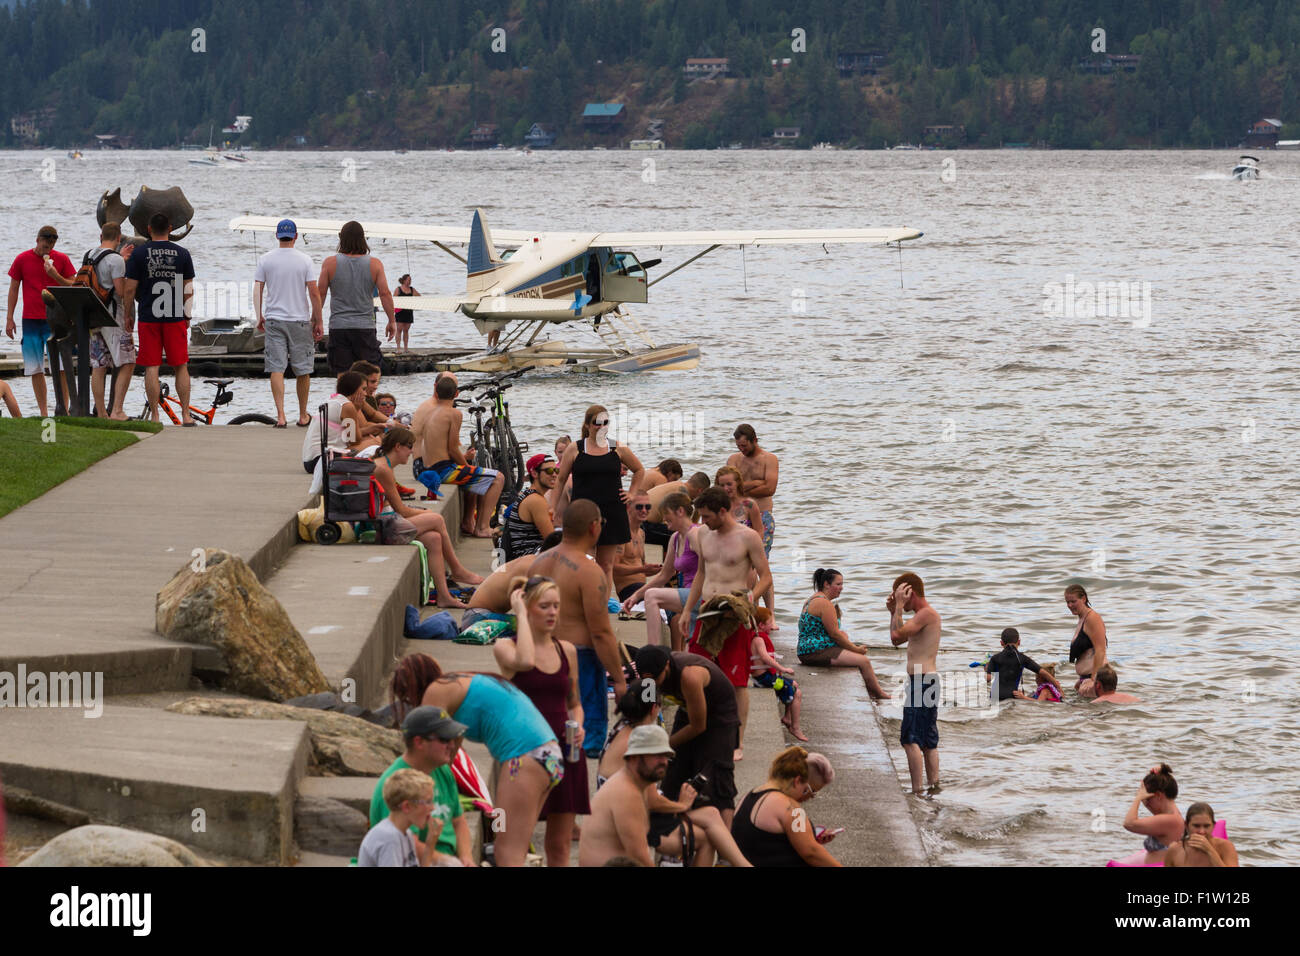 Coeur d' Alene, Idaho - August 01 : Amphibious plane floating on the lake with a crowd of people enjoying a summer day, August 0 Stock Photo